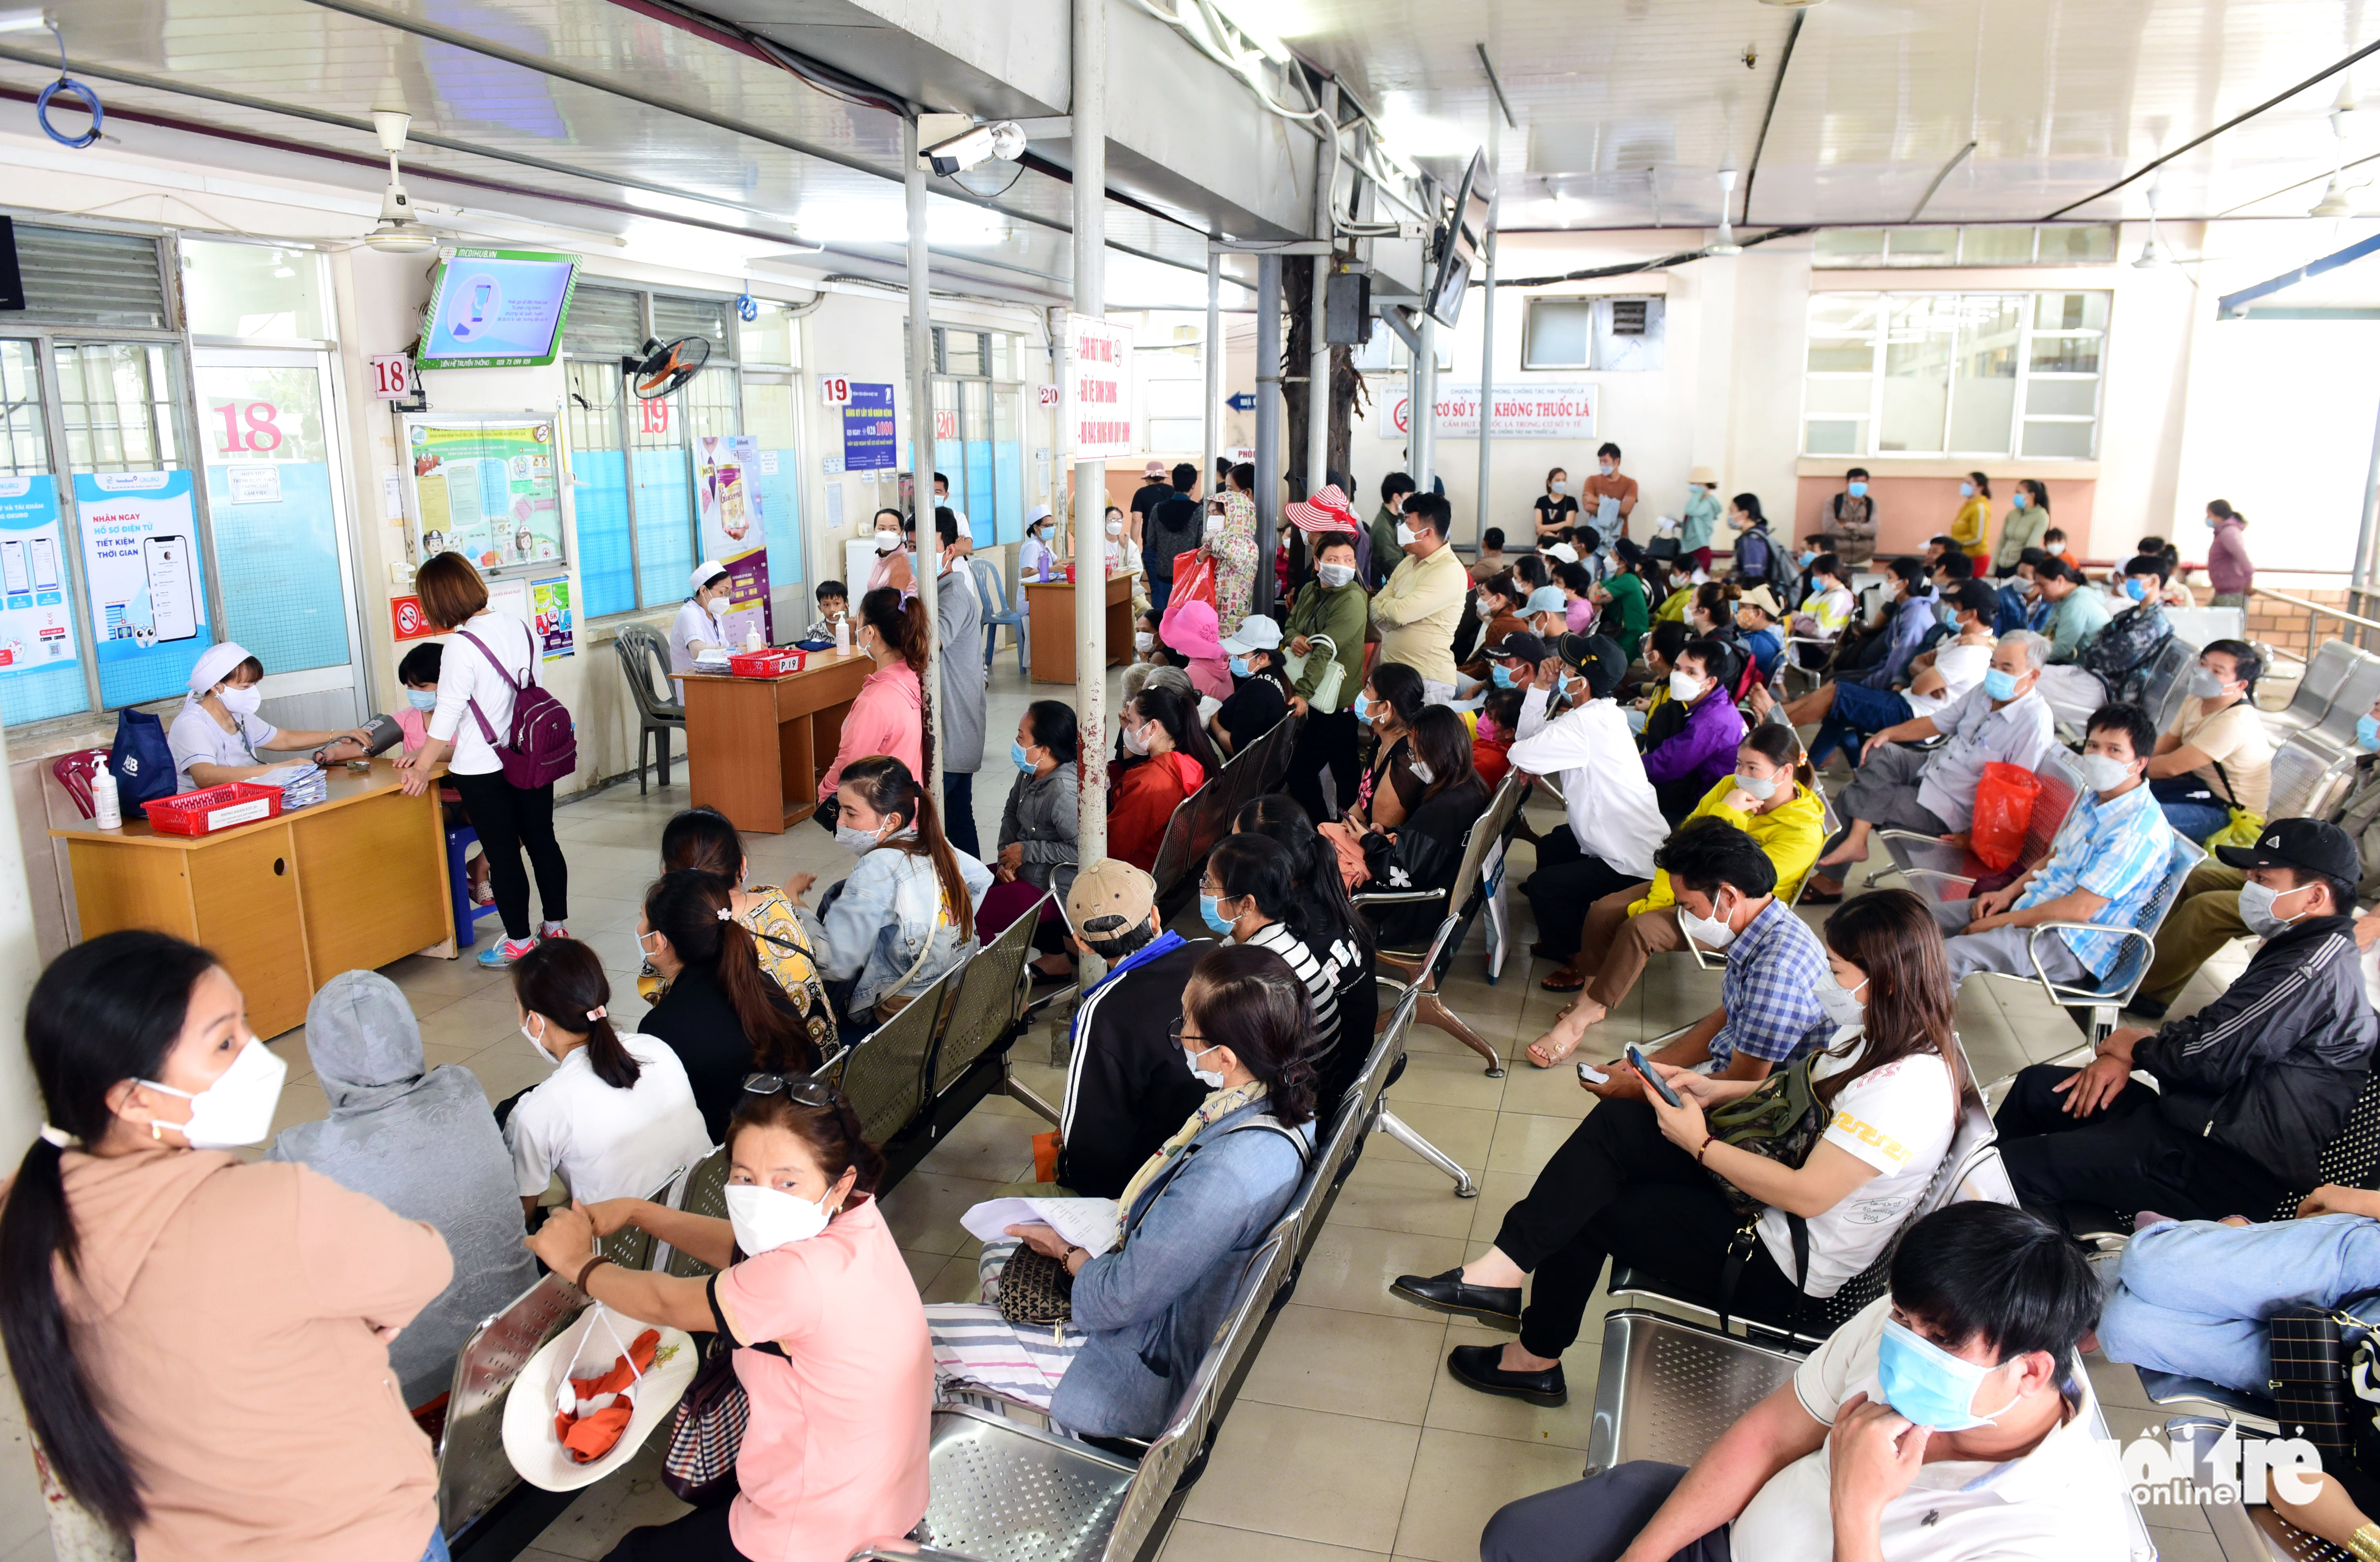 Patients wait for health checks at the medical examination department of the Ho Chi Minh City Hospital for Tropical Diseases. Photo: Duyen Phan / Tuoi Tre